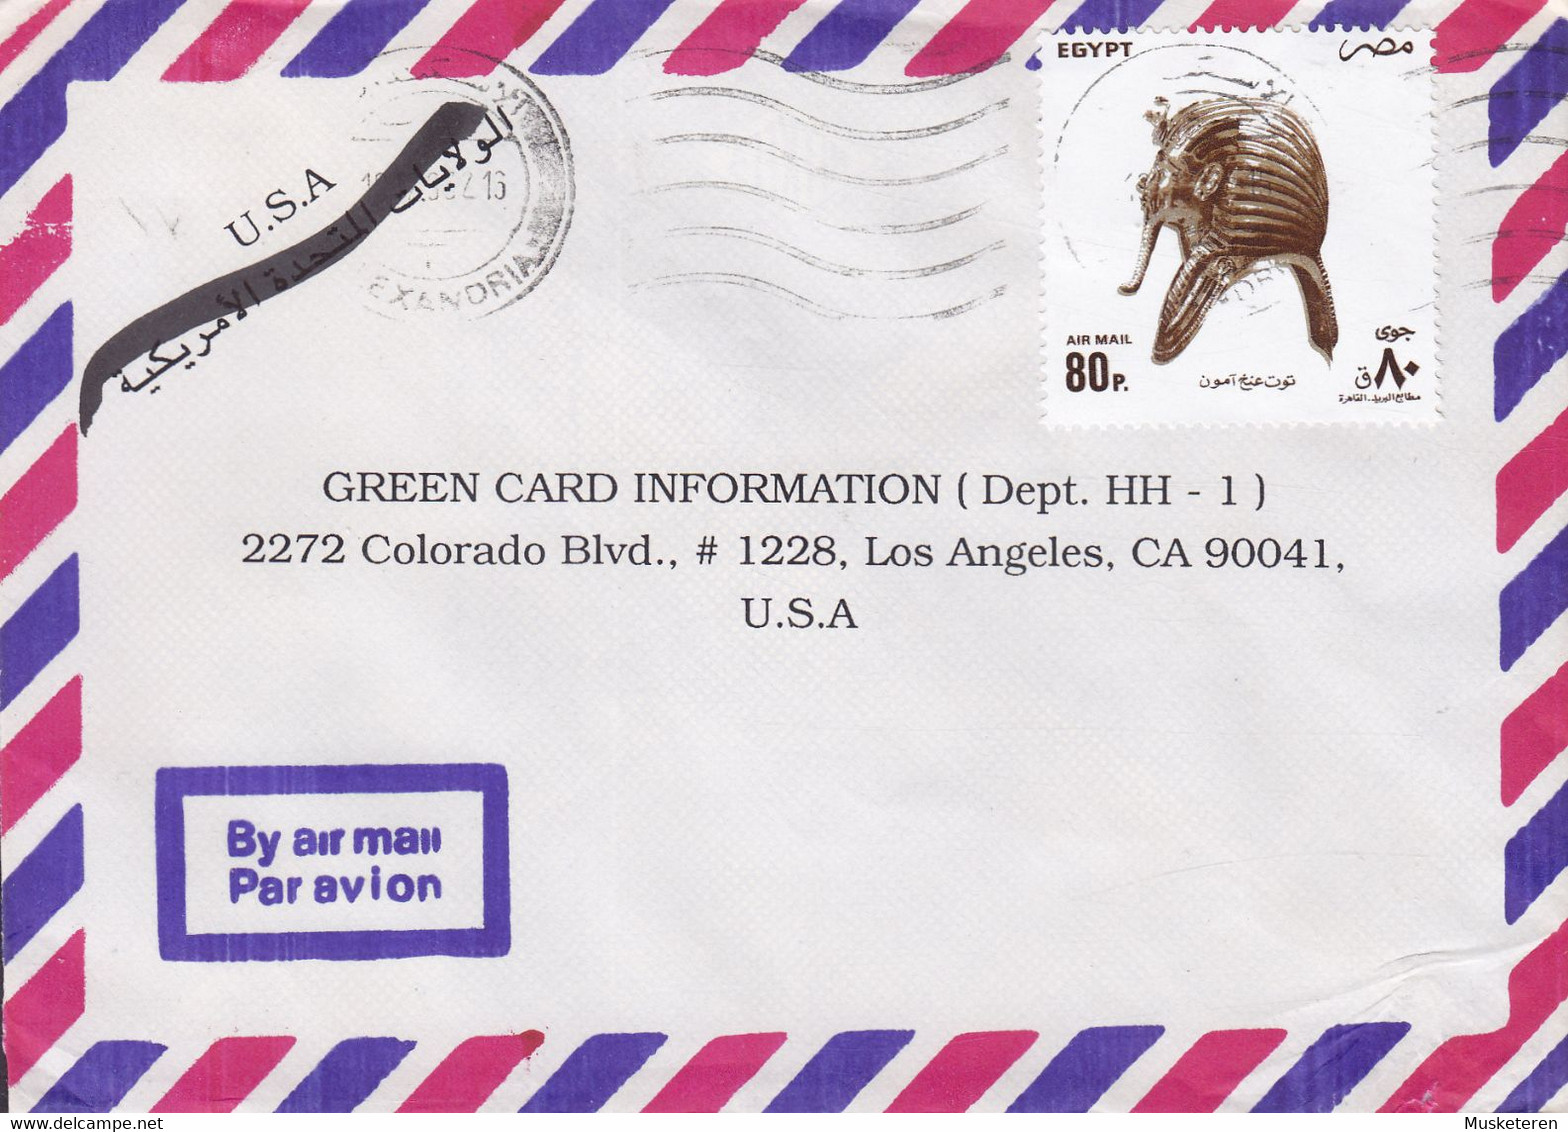 Egypt Egypte Air Mail ALEXANDRIA 1993 Cover Brief LOS ANGELES United States Pharao Tut-Ank-Amon Gold Death Mask - Storia Postale